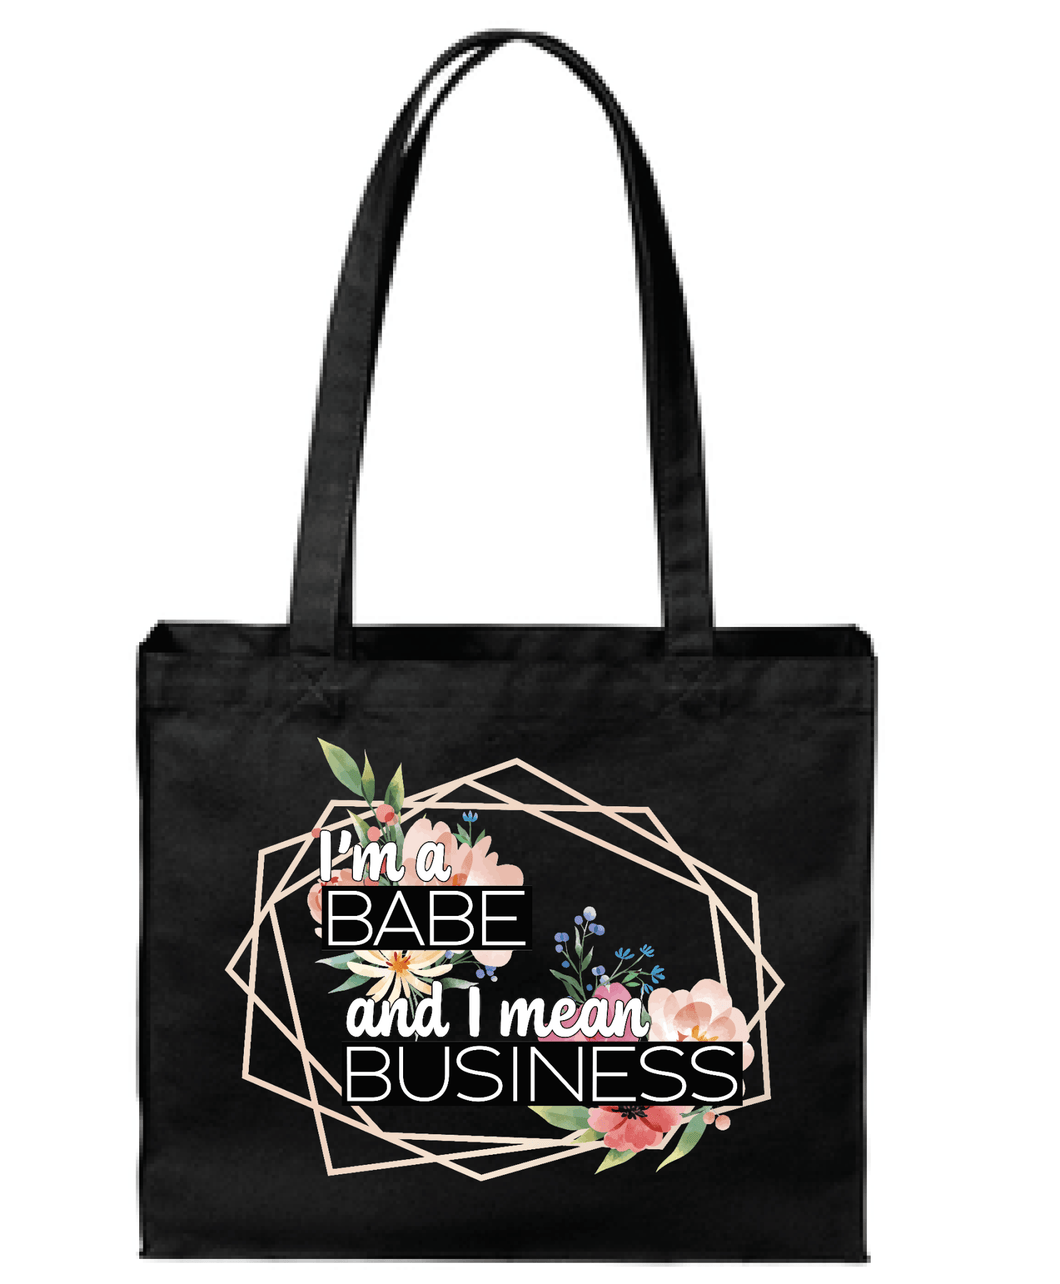 I'M A BABE TOTE BAG CORE COTTON - Get Things Printed INC